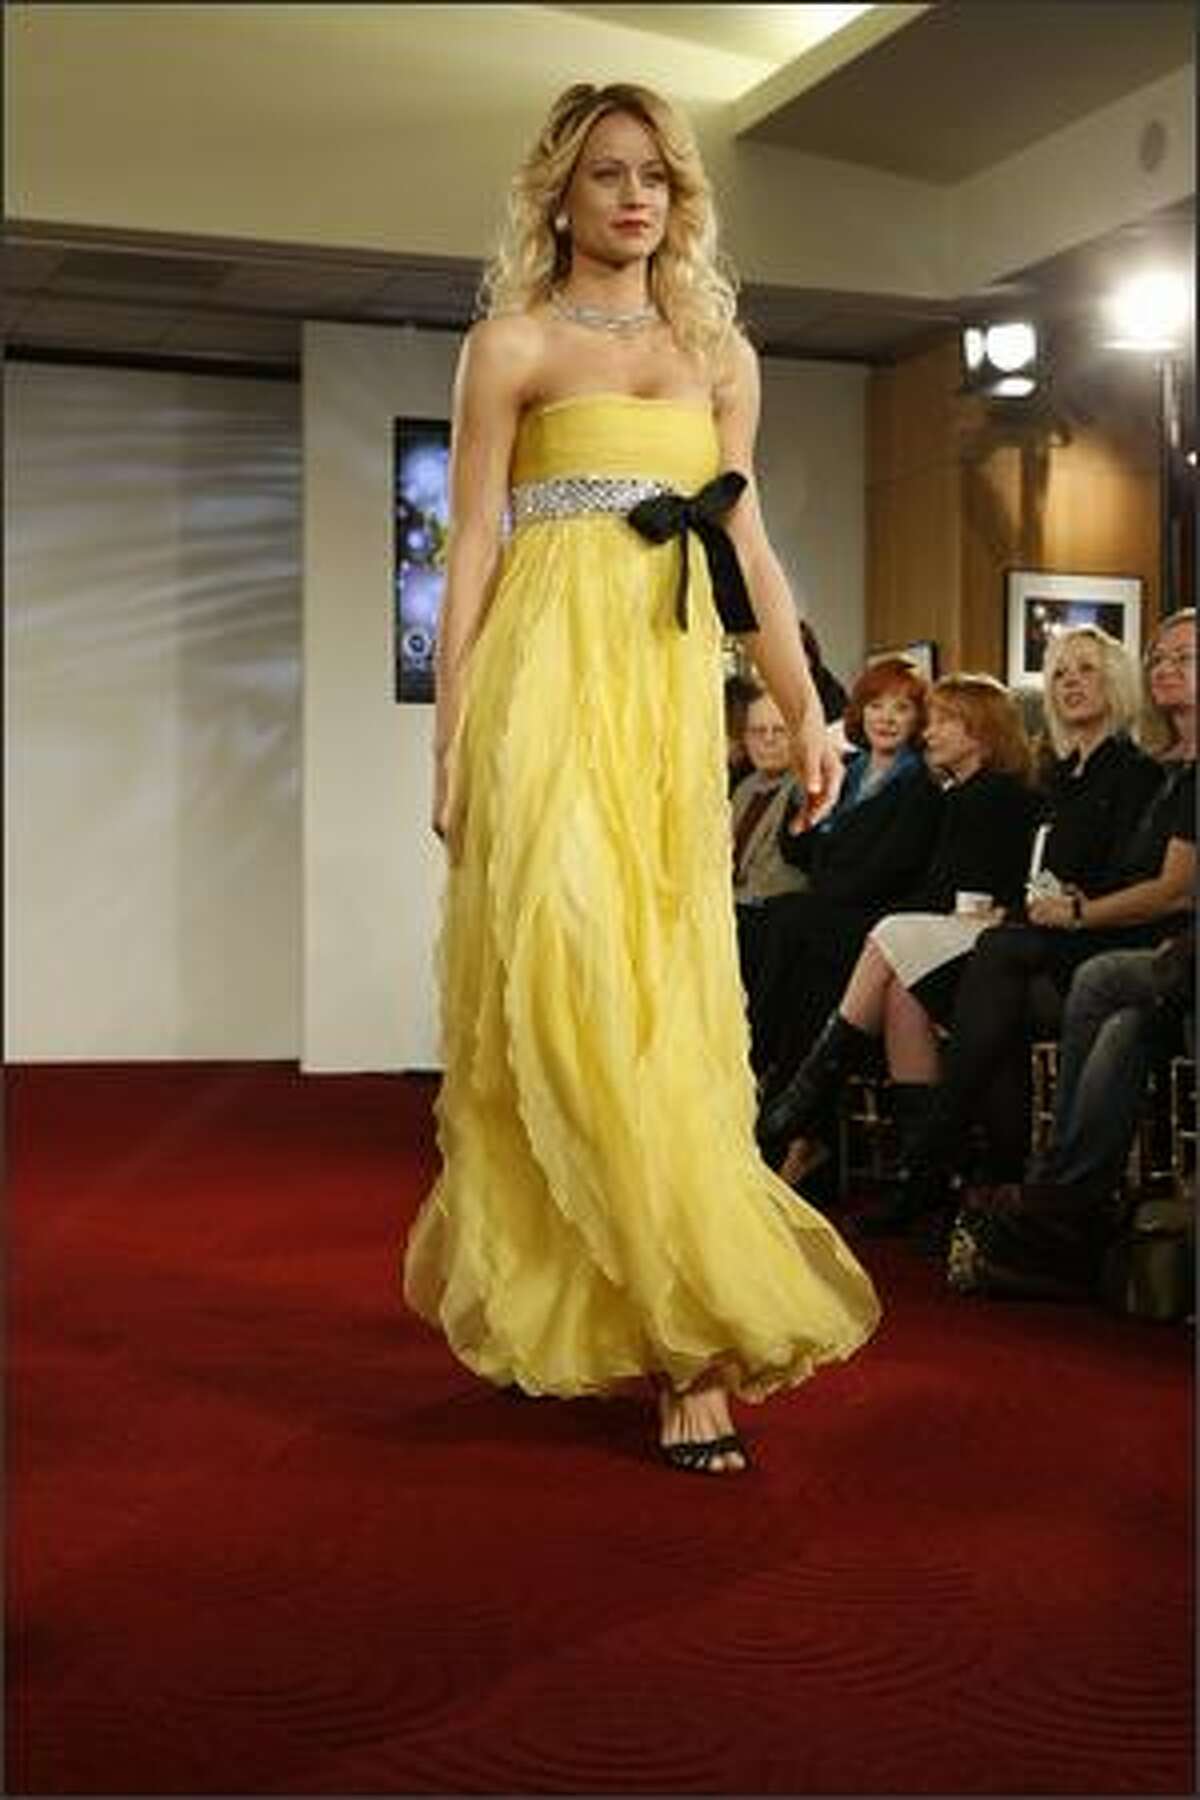 A model walks the runway at the Oscar Fashion Show at the Academy of Motion Pictures Arts and Sciences on Wednesday in Beverly Hills, Calif.